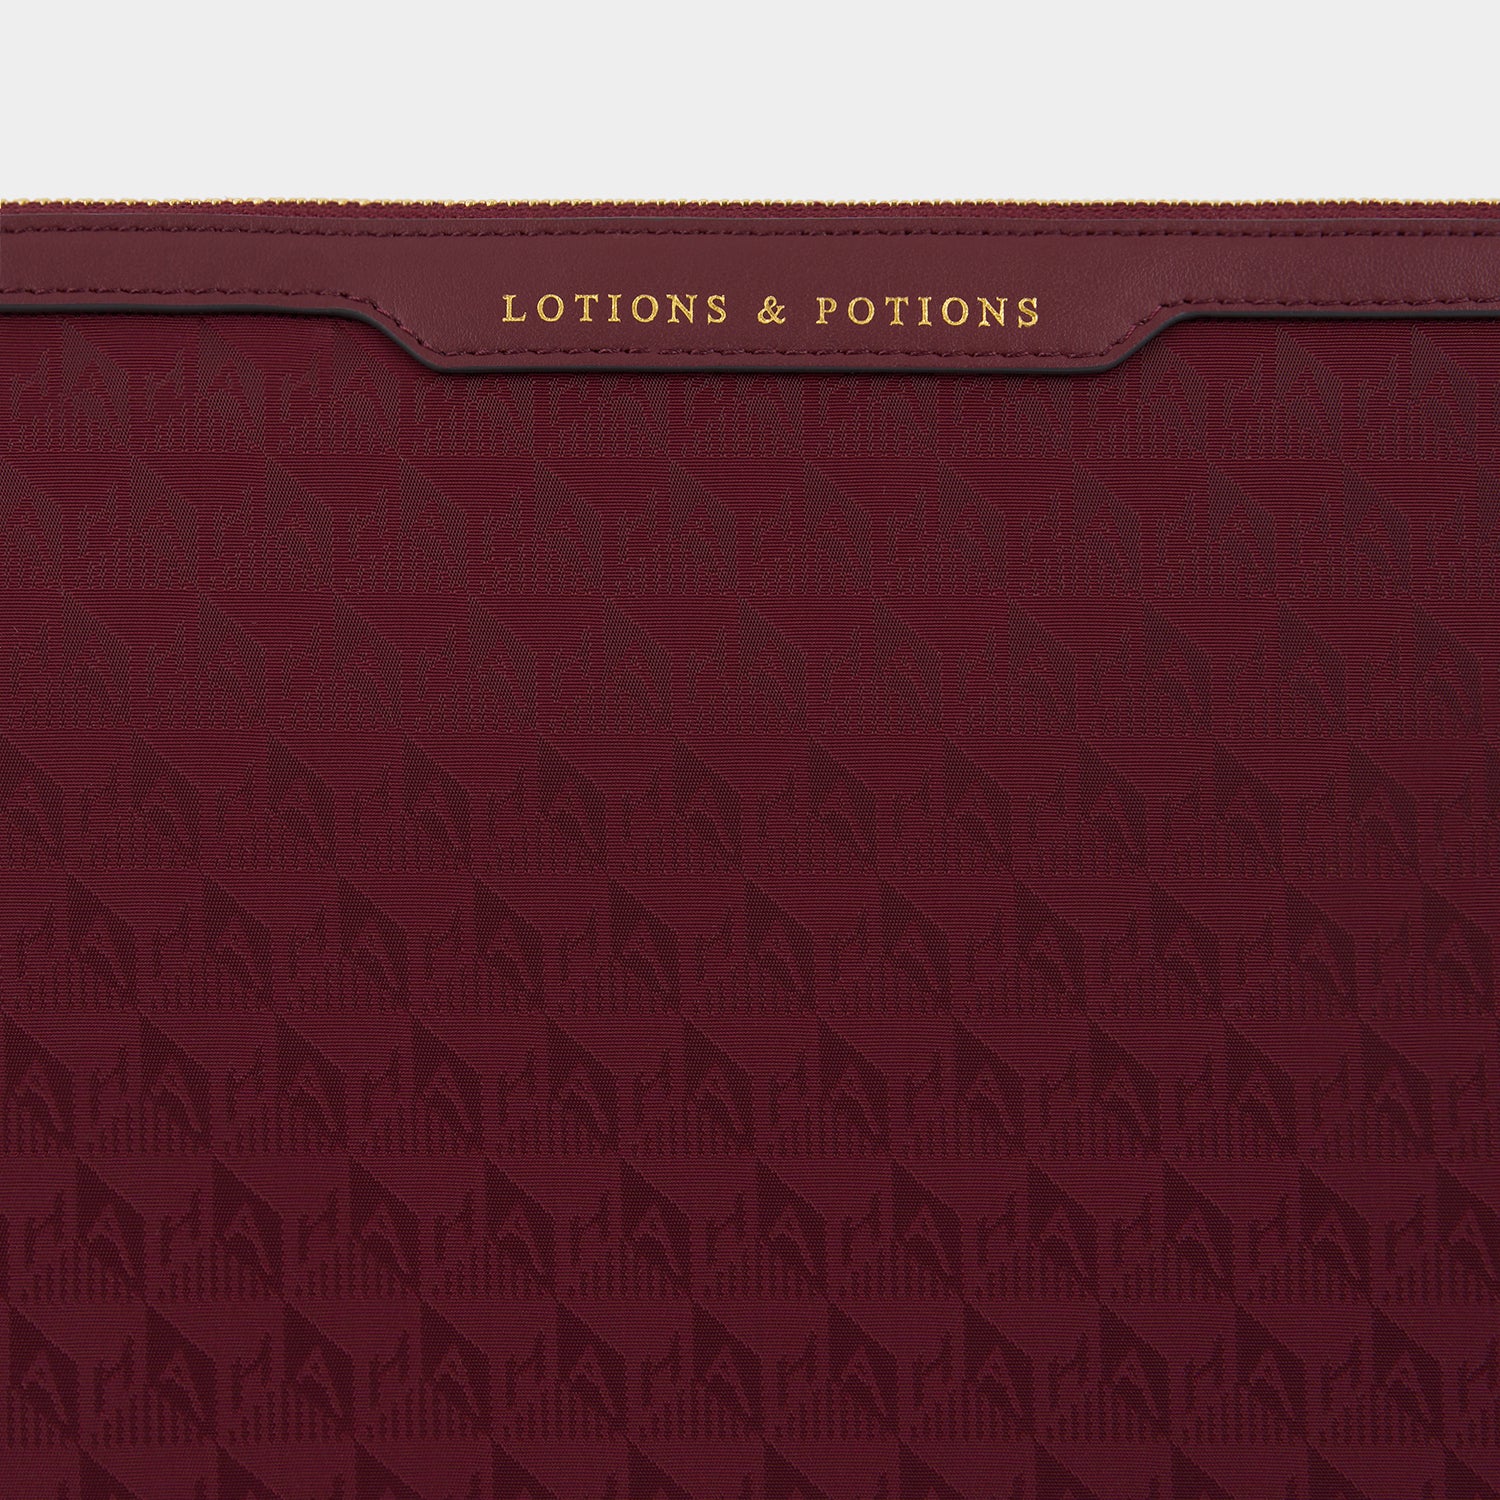 Logo Lotions and Potions Pouch -

                  
                    Jacquard Nylon in Medium Red -
                  

                  Anya Hindmarch UK
